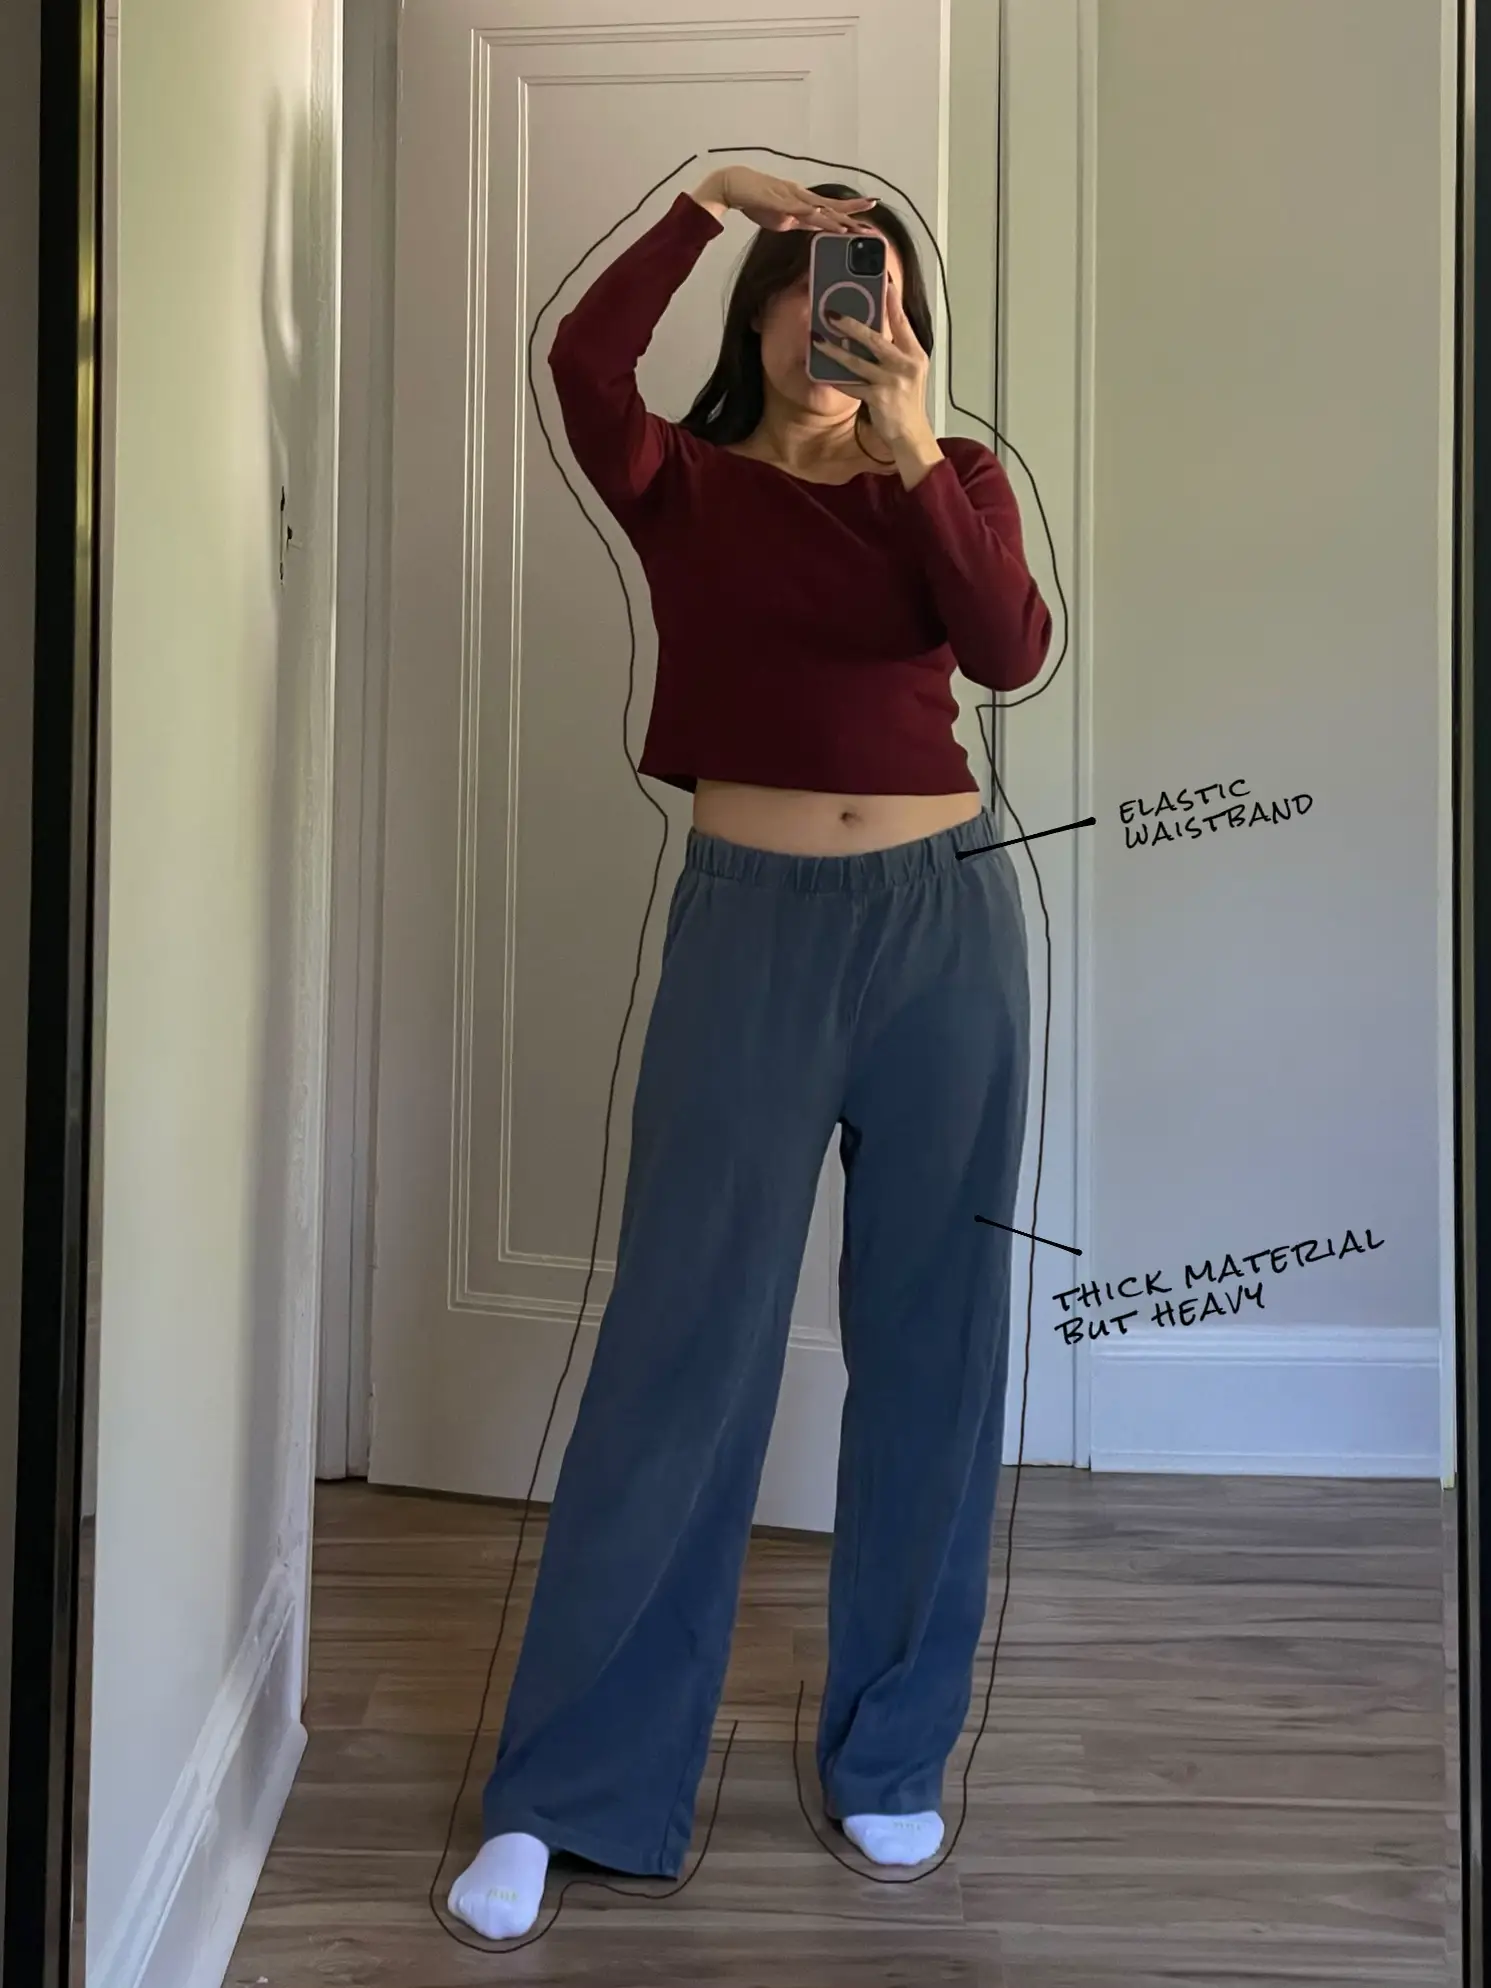 Ways to dress up a sweatpants look, Gallery posted by Tianakori